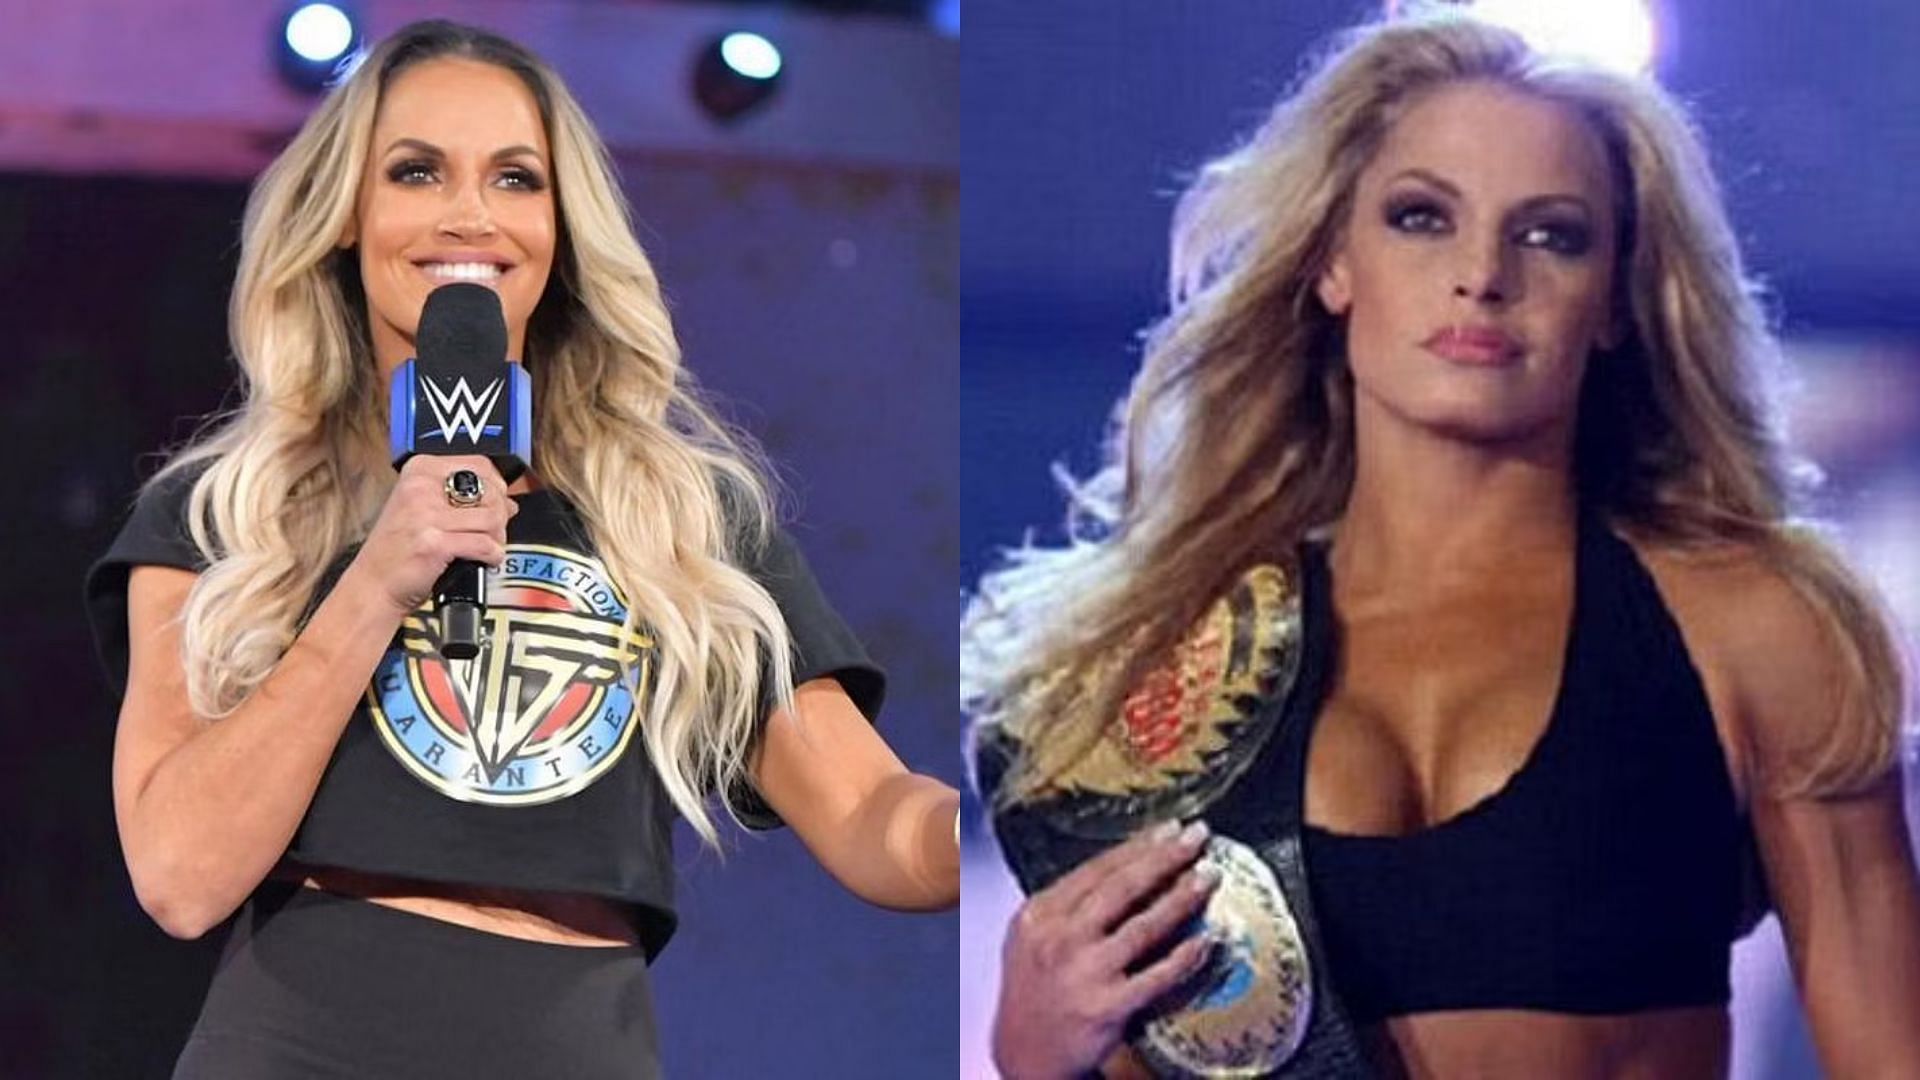 WWE Hall of Famer Trish Stratus recently tweeted that she will be in attend...